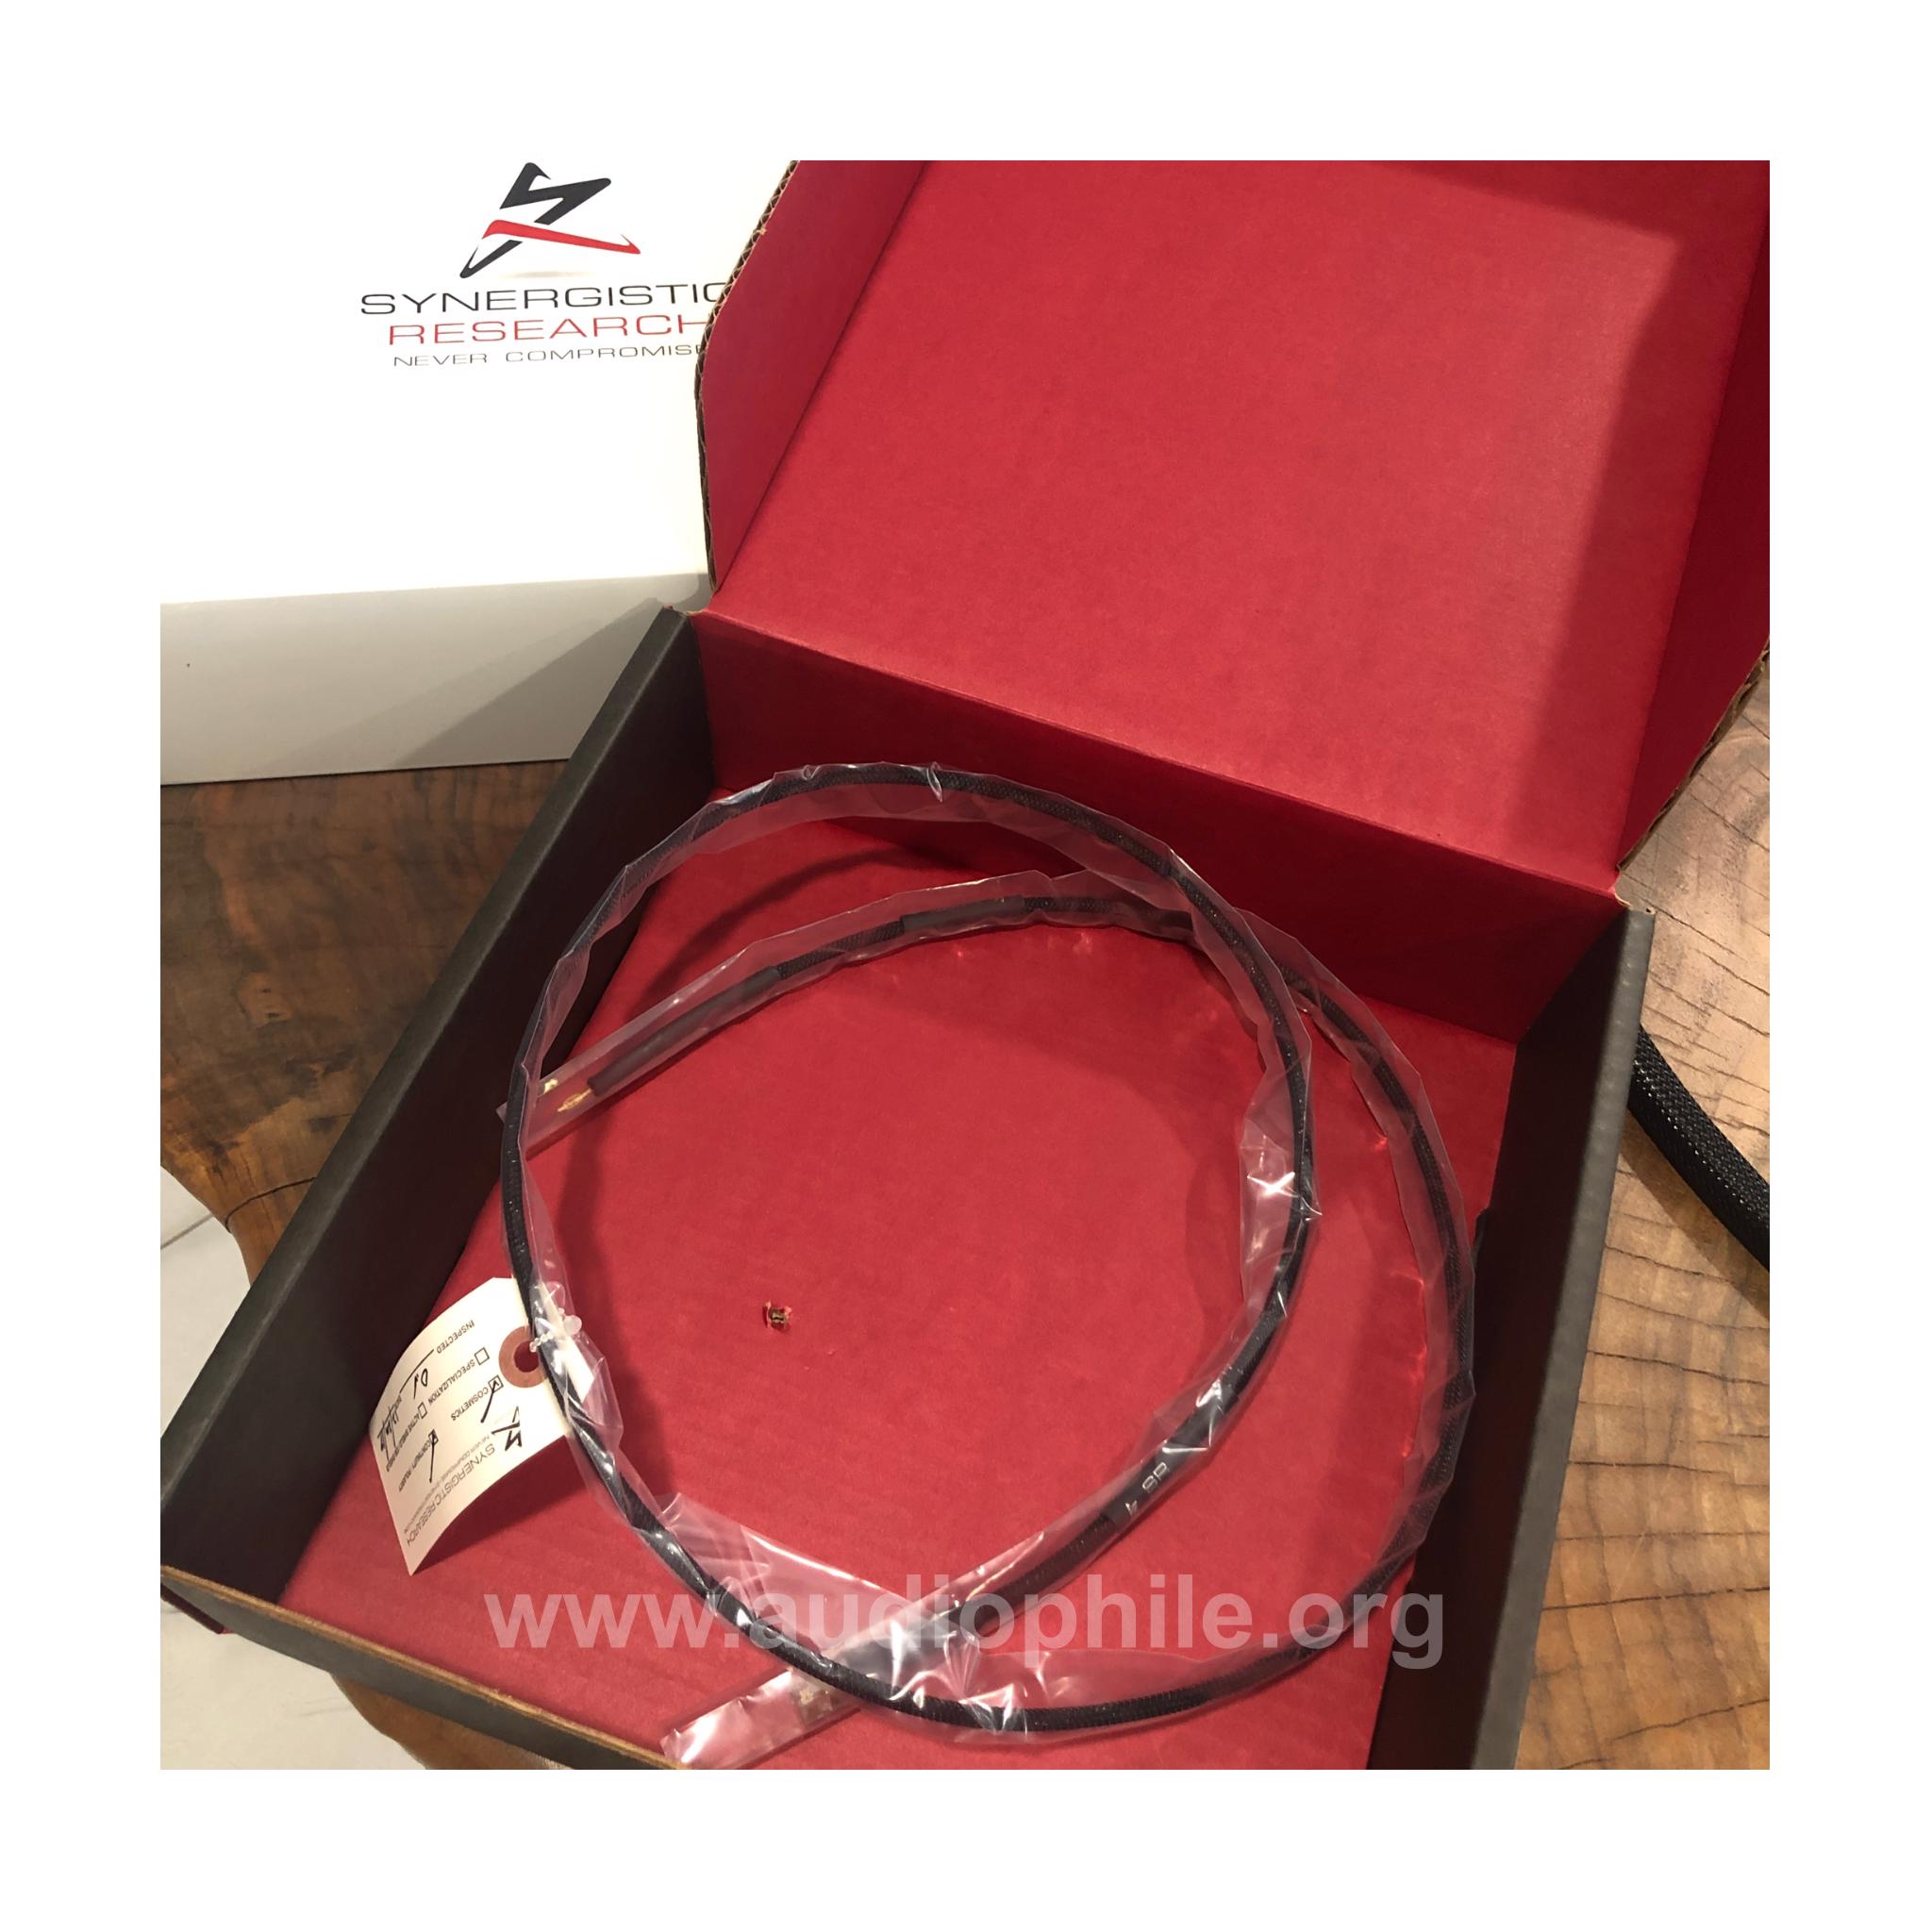 Synergistic research high definition ground cable ethernet 1.25 mt